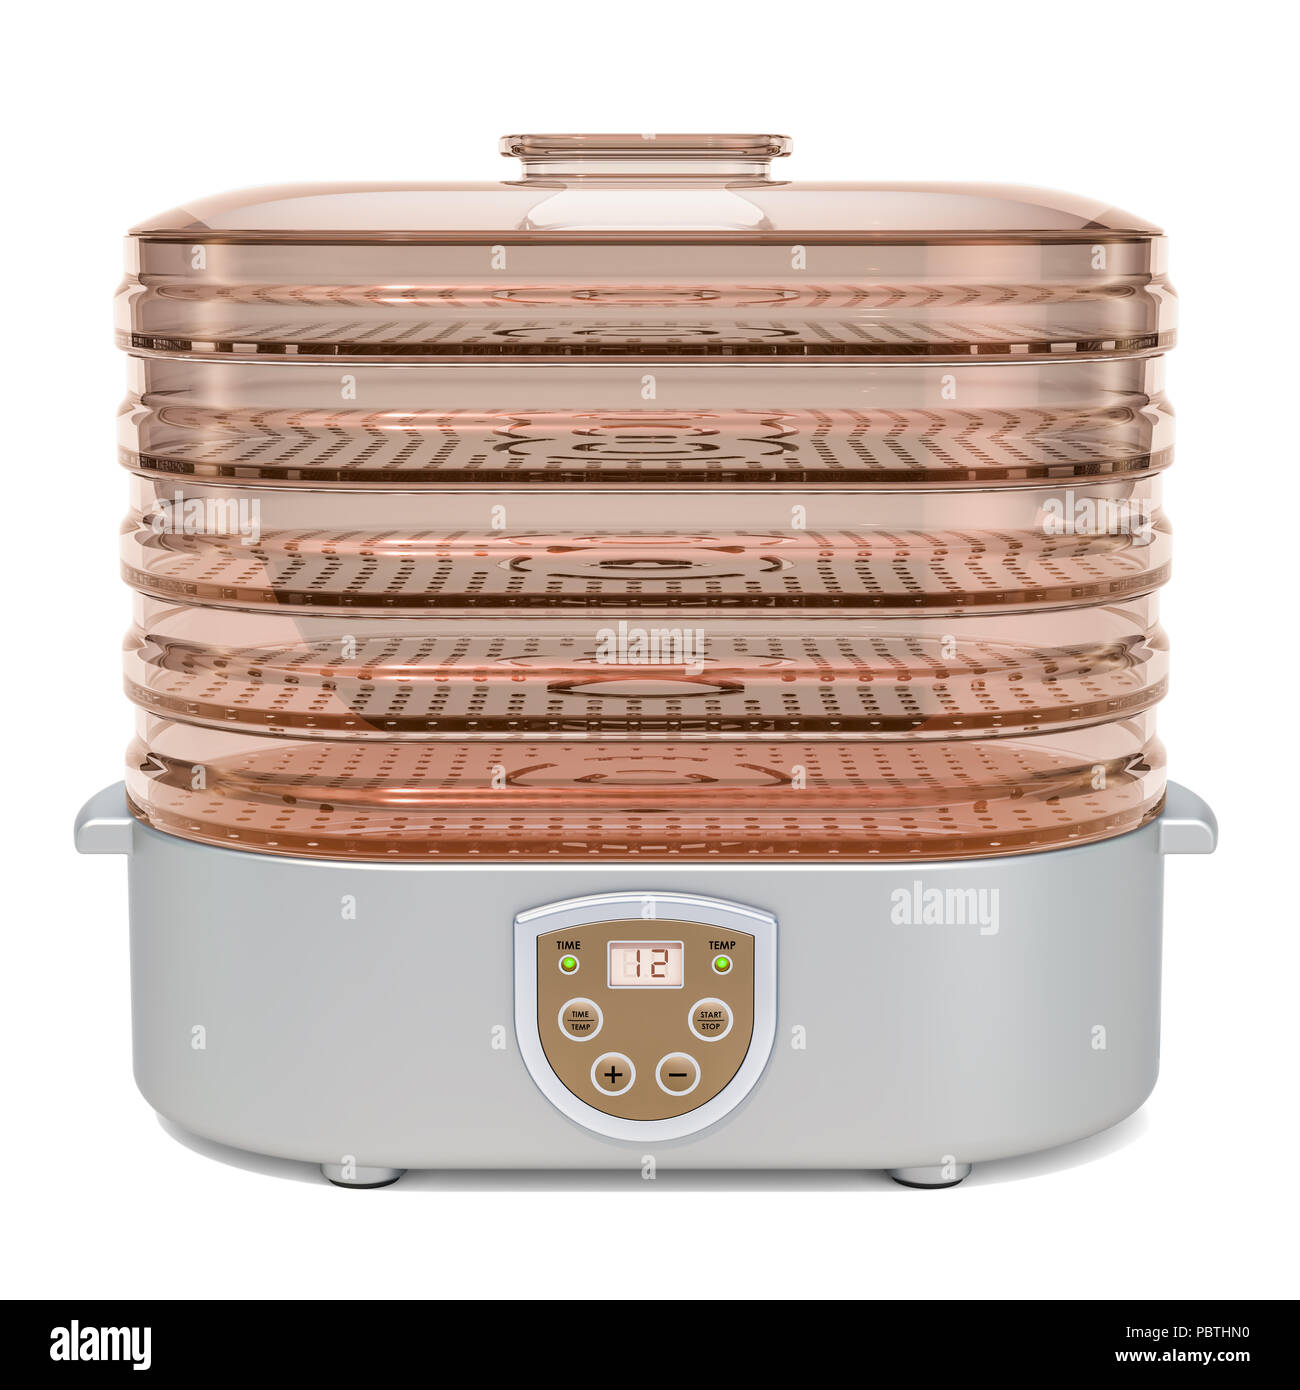 https://c8.alamy.com/comp/PBTHN0/electric-food-dehydrator-3d-rendering-isolated-on-white-background-PBTHN0.jpg